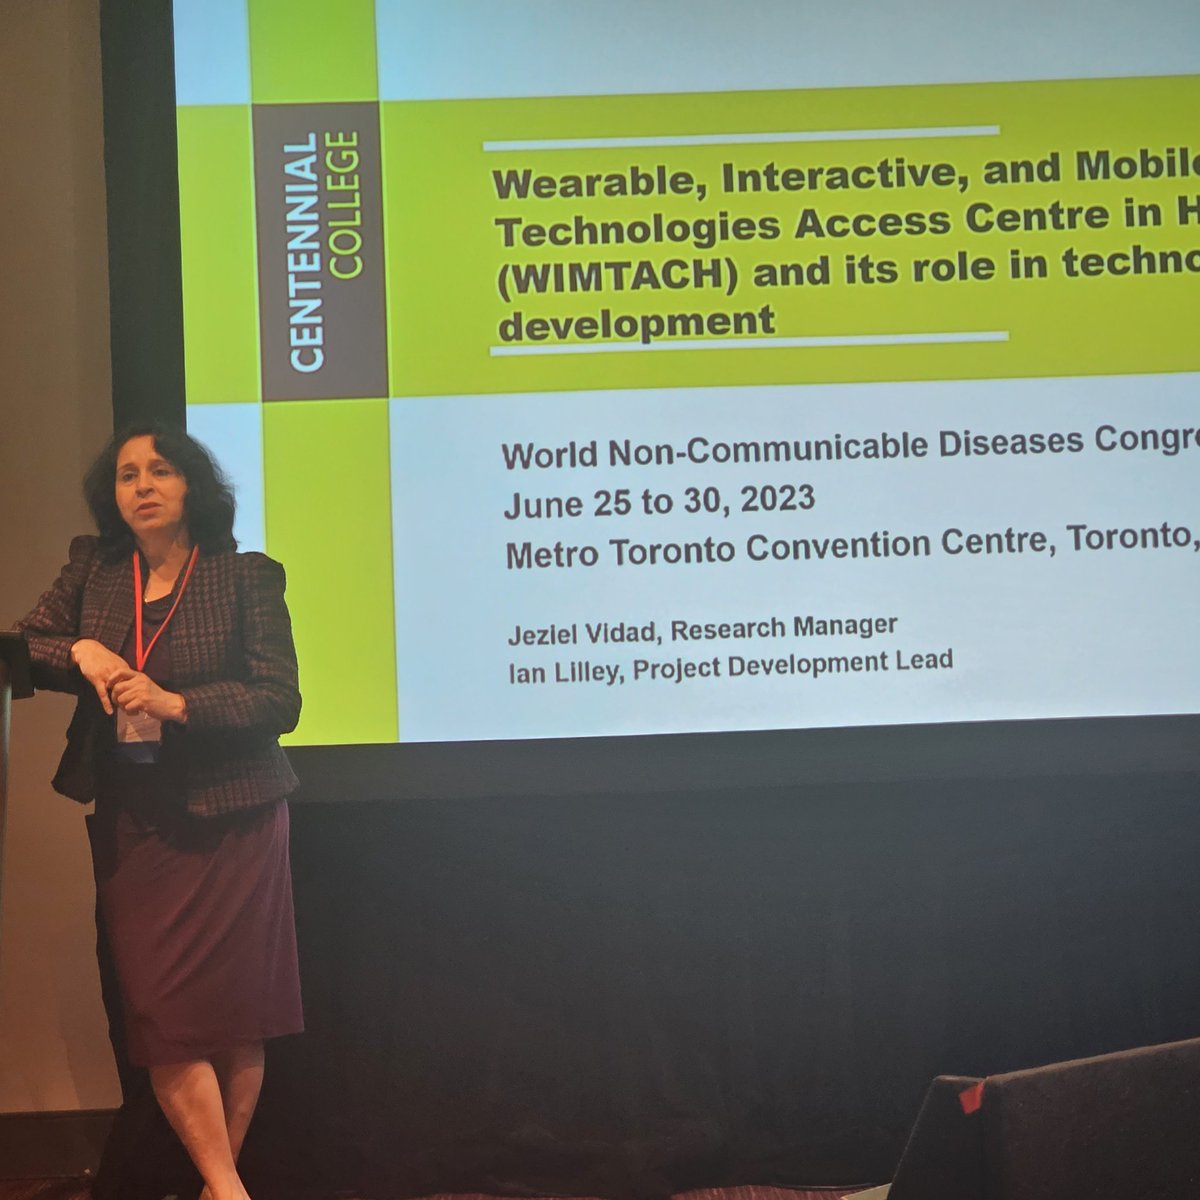 @PurnimaTyagi14 facilitating session on New Technologies for NCD Control and Prediction at @wncd2023 happening @MTCC_Events in Toronto.

#wncd2023
#Toronto
#Torontohealth
#healthcare
#tech